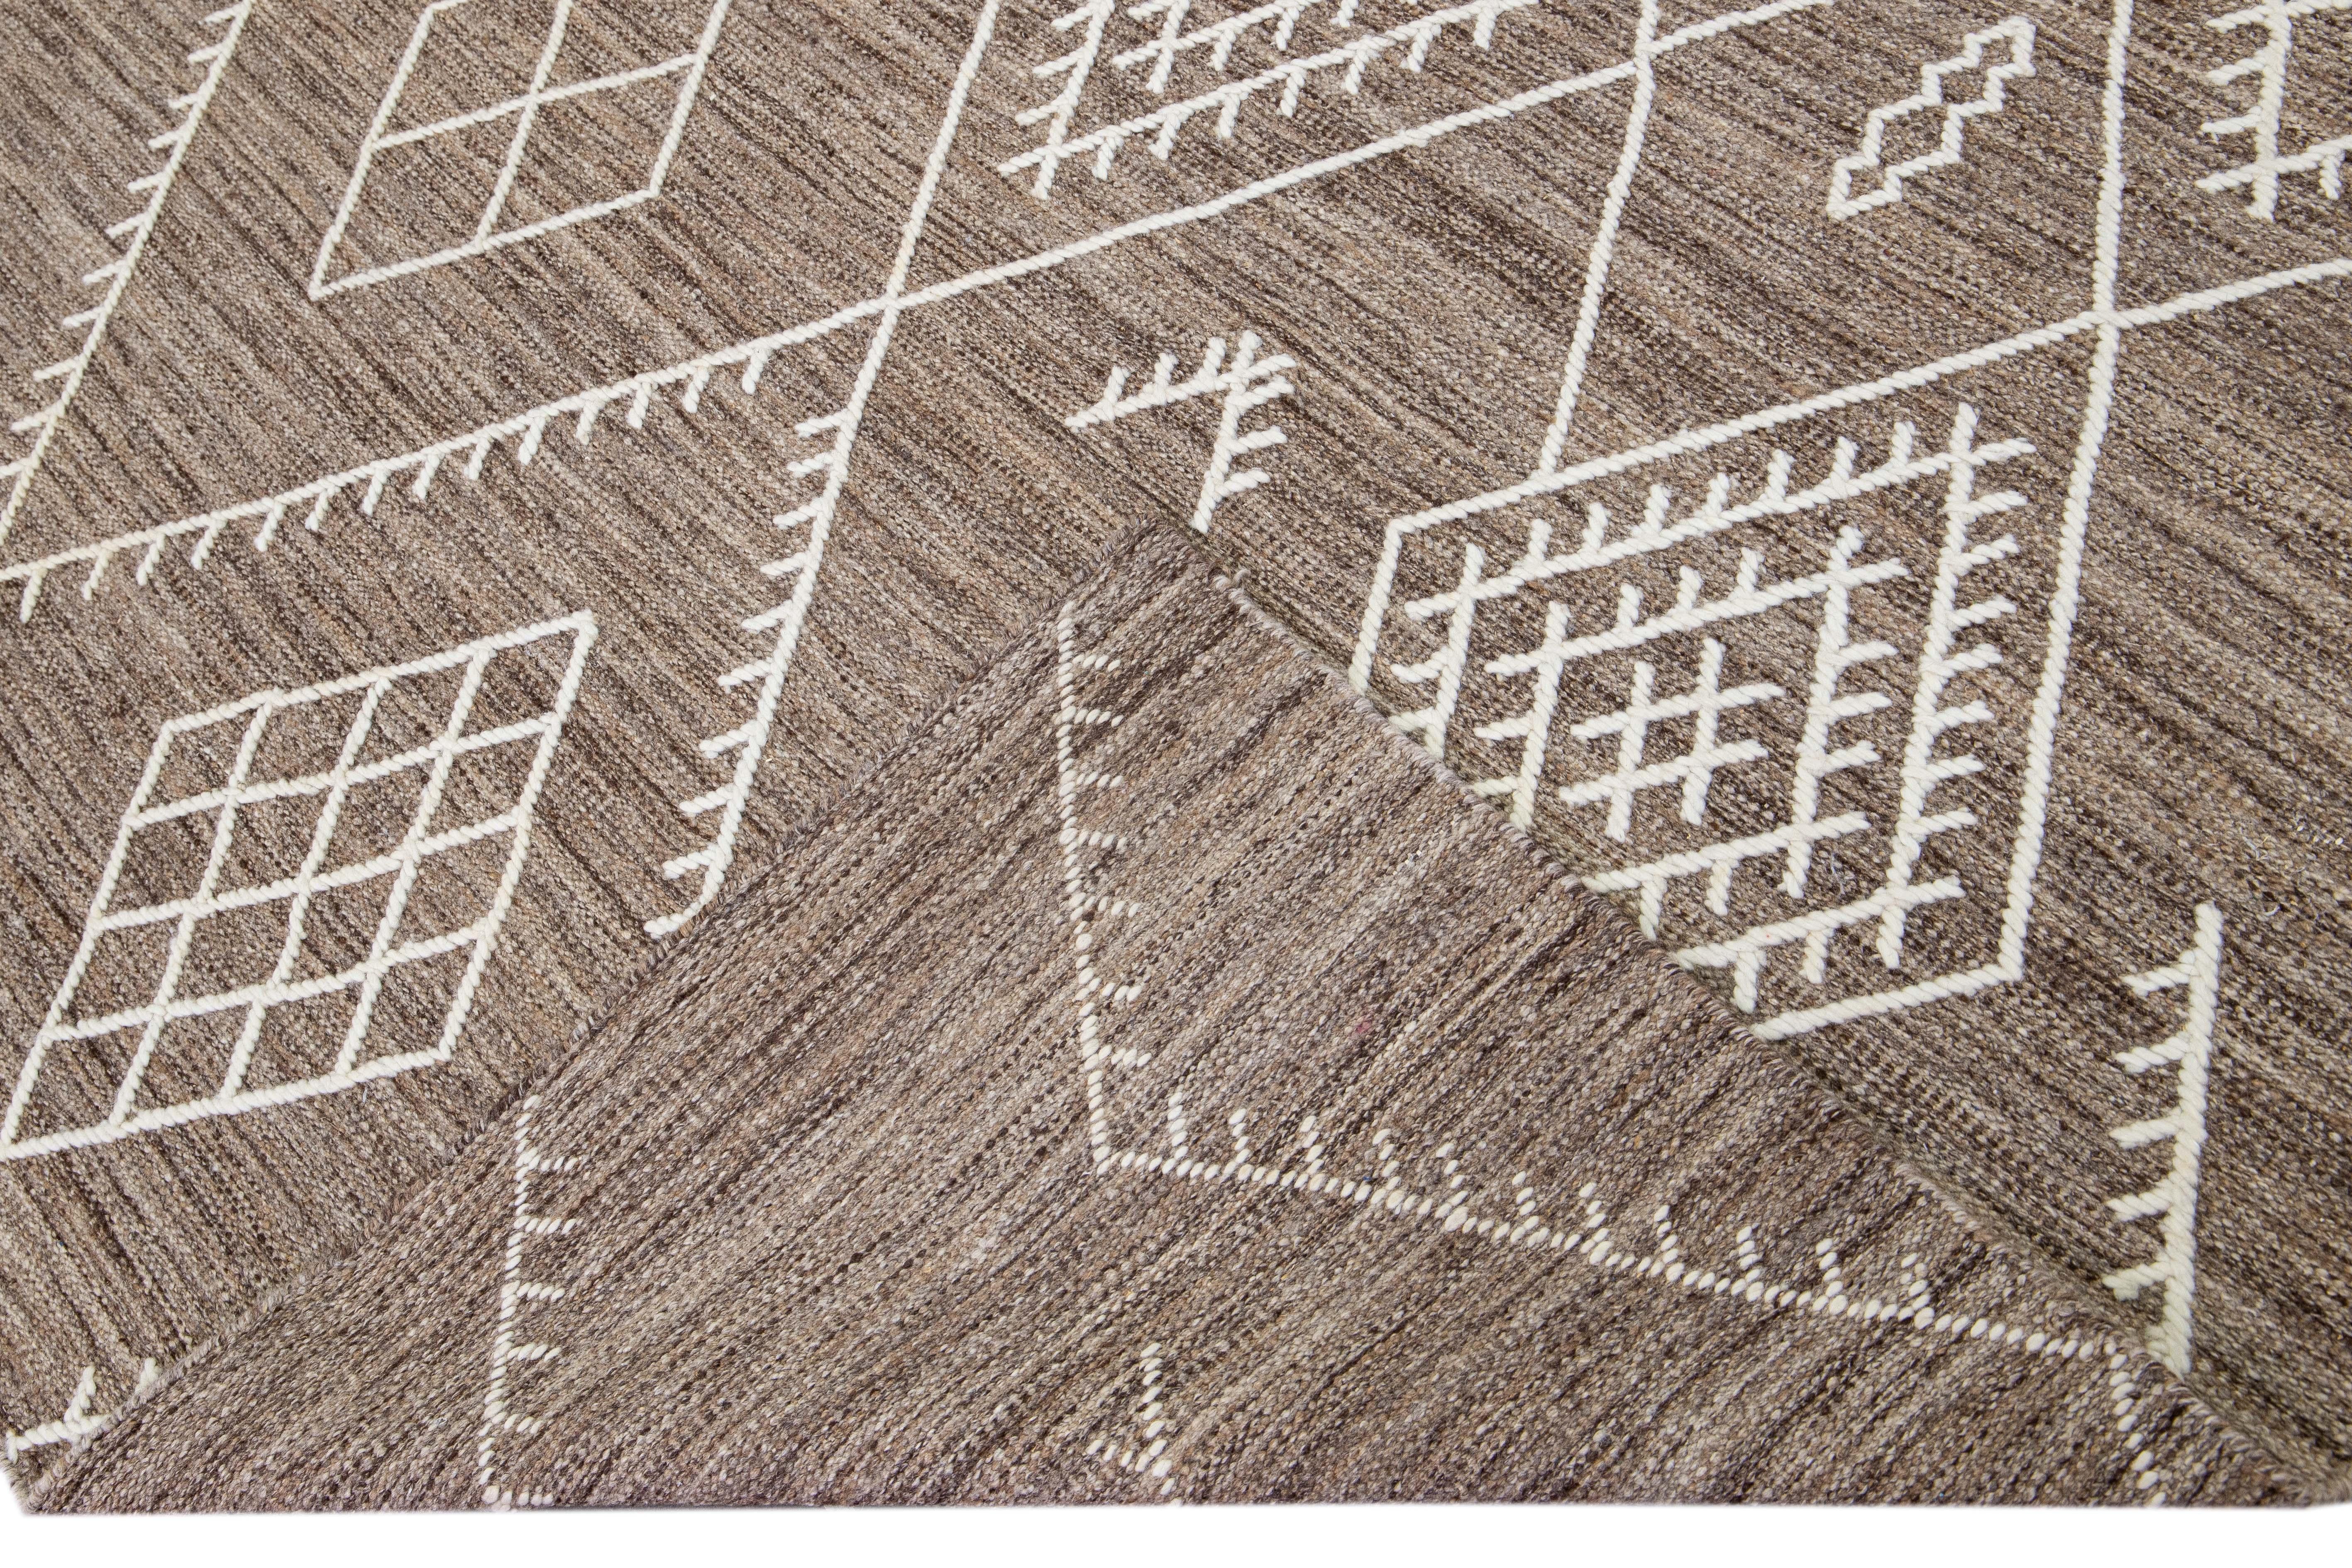 Beautiful kilim handmade wool rug with a brown field. This custom modern flatweave rug part of our Nantucket collection has ivory accents and features a gorgeous all-over geometric coastal design.

This rug measures: 10' x 14'.

Our rugs are